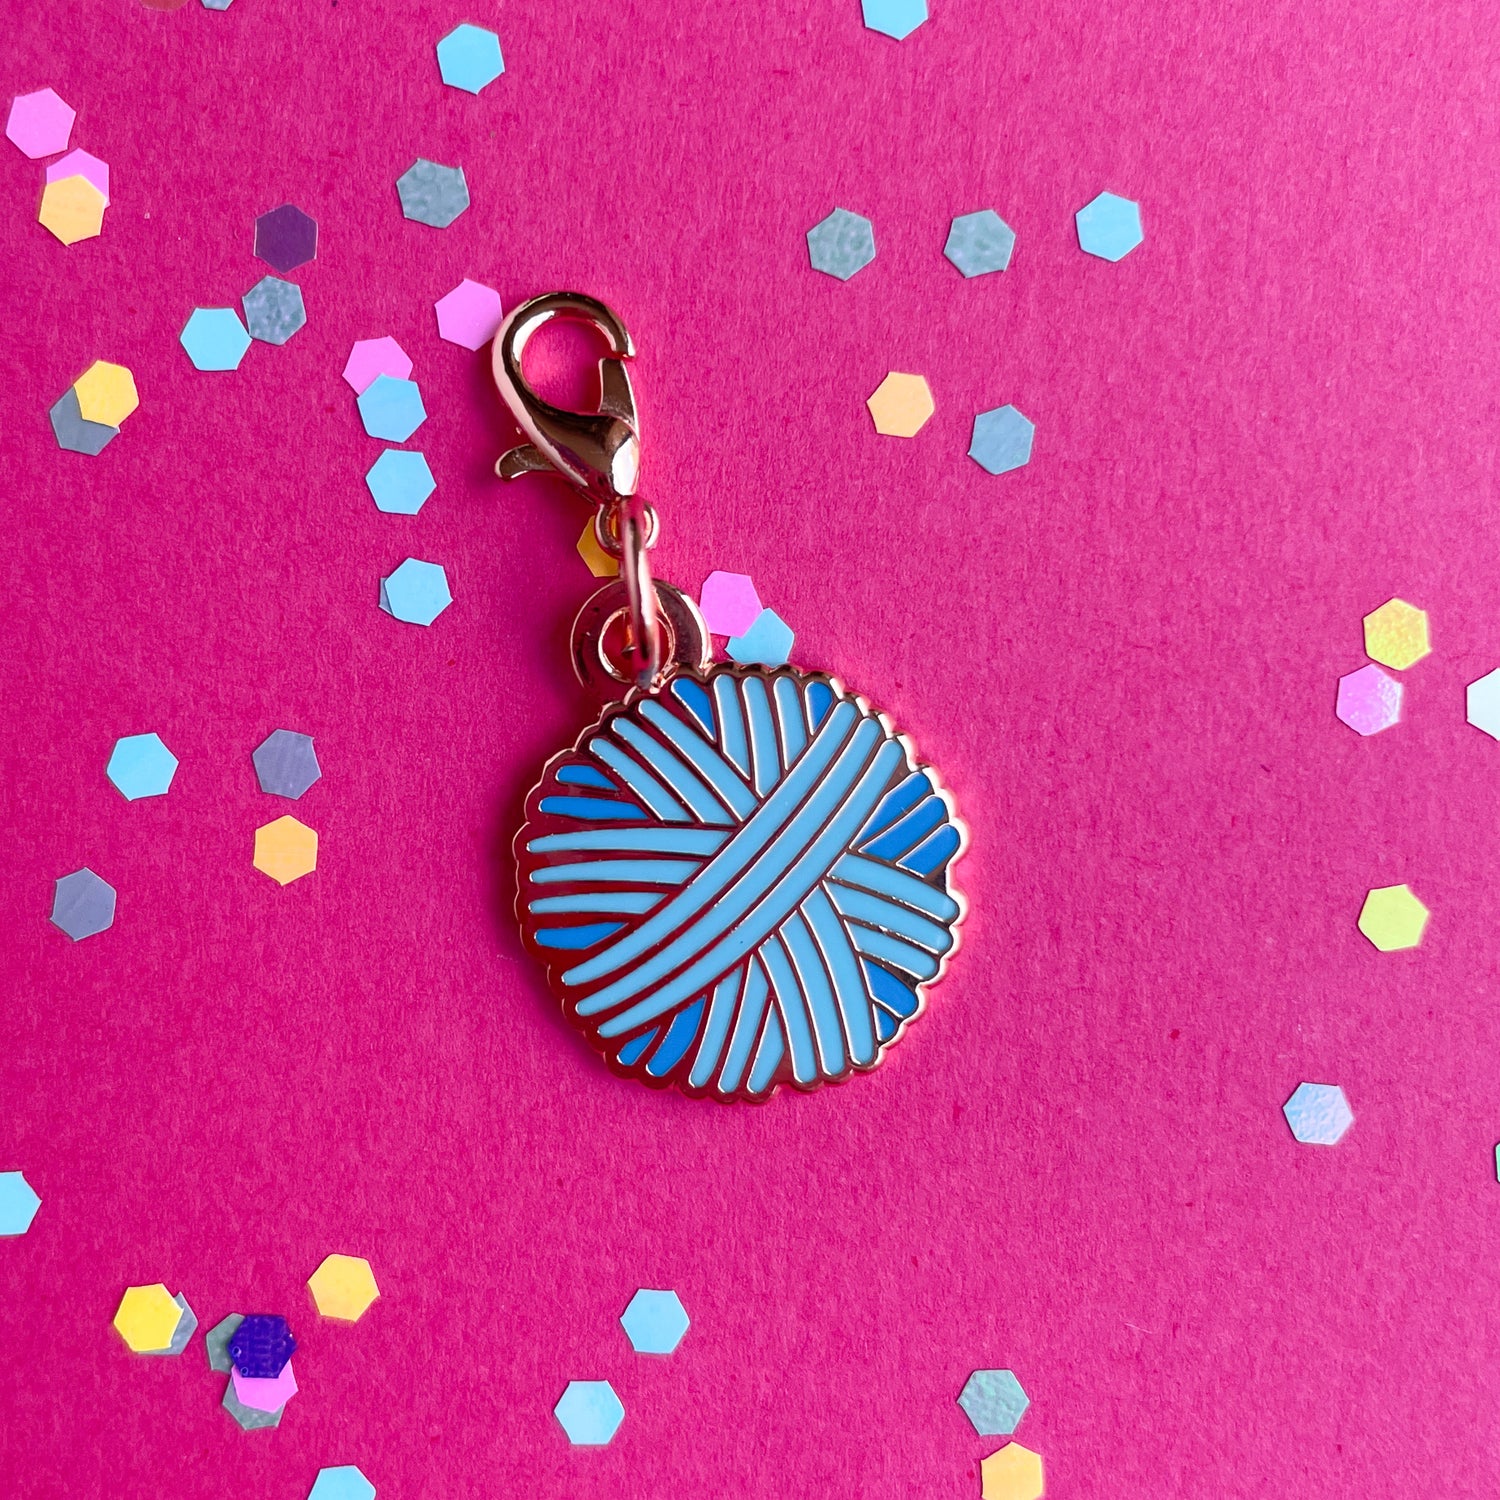 A pastel blue yarn ball charm on a hot pink background with confetti